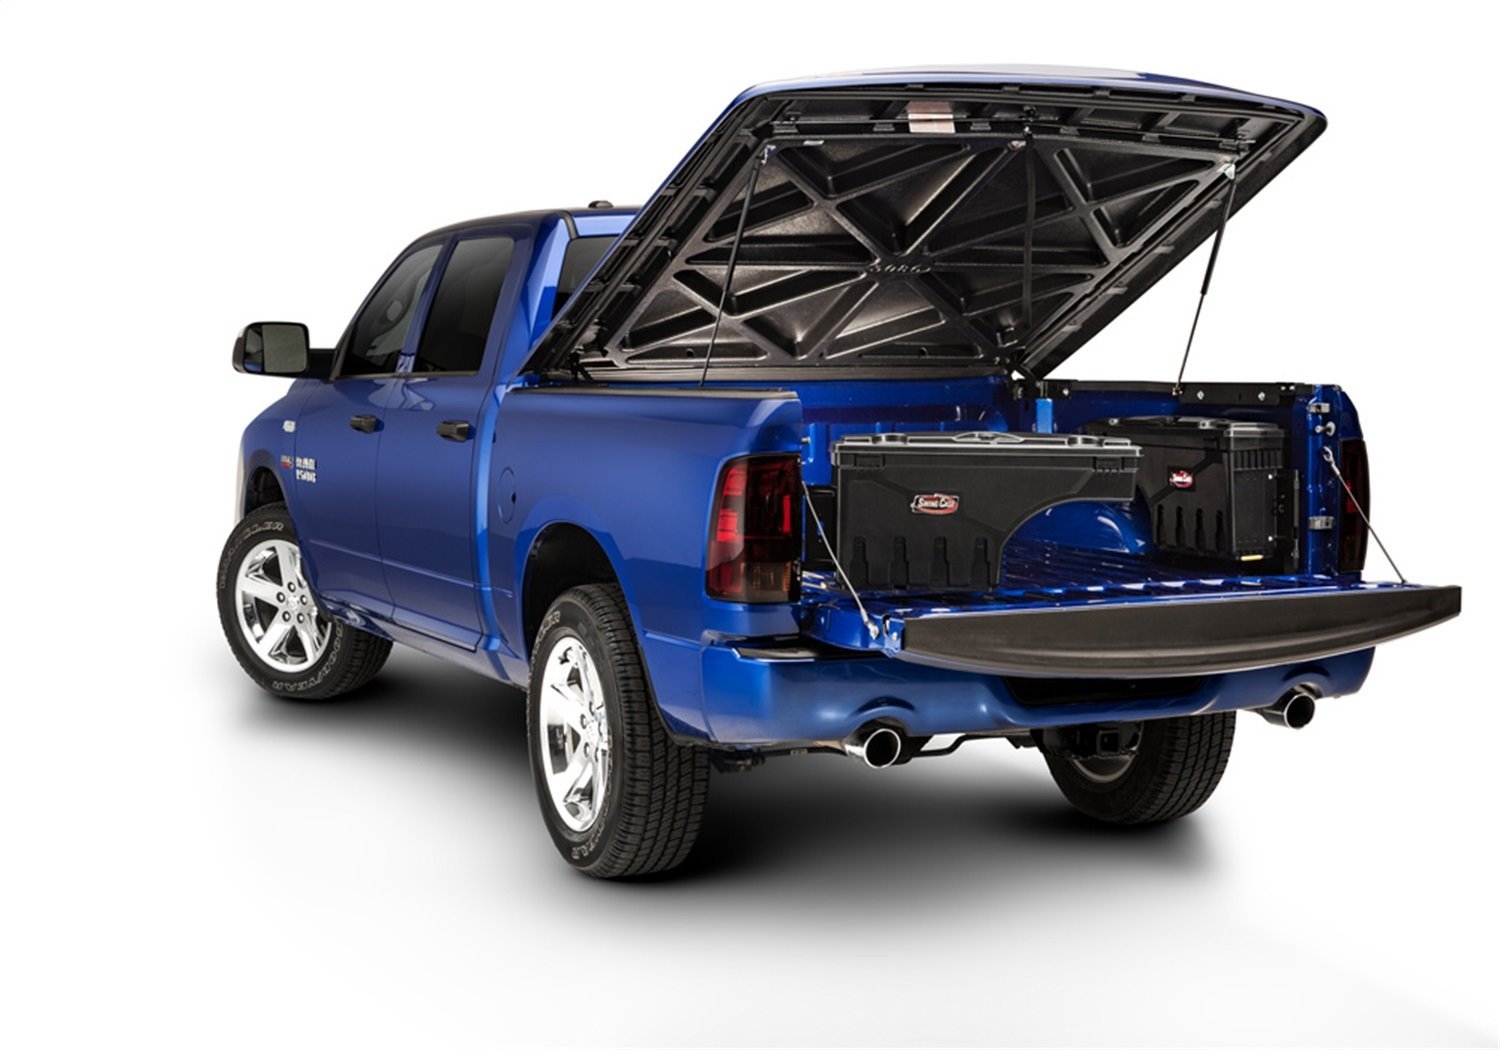 SC200D Swing Case, 1999-2016 Ford F-250/350 Drivers Side, Will not fit 2013-2016 models w/ Factory Tow Package, Black